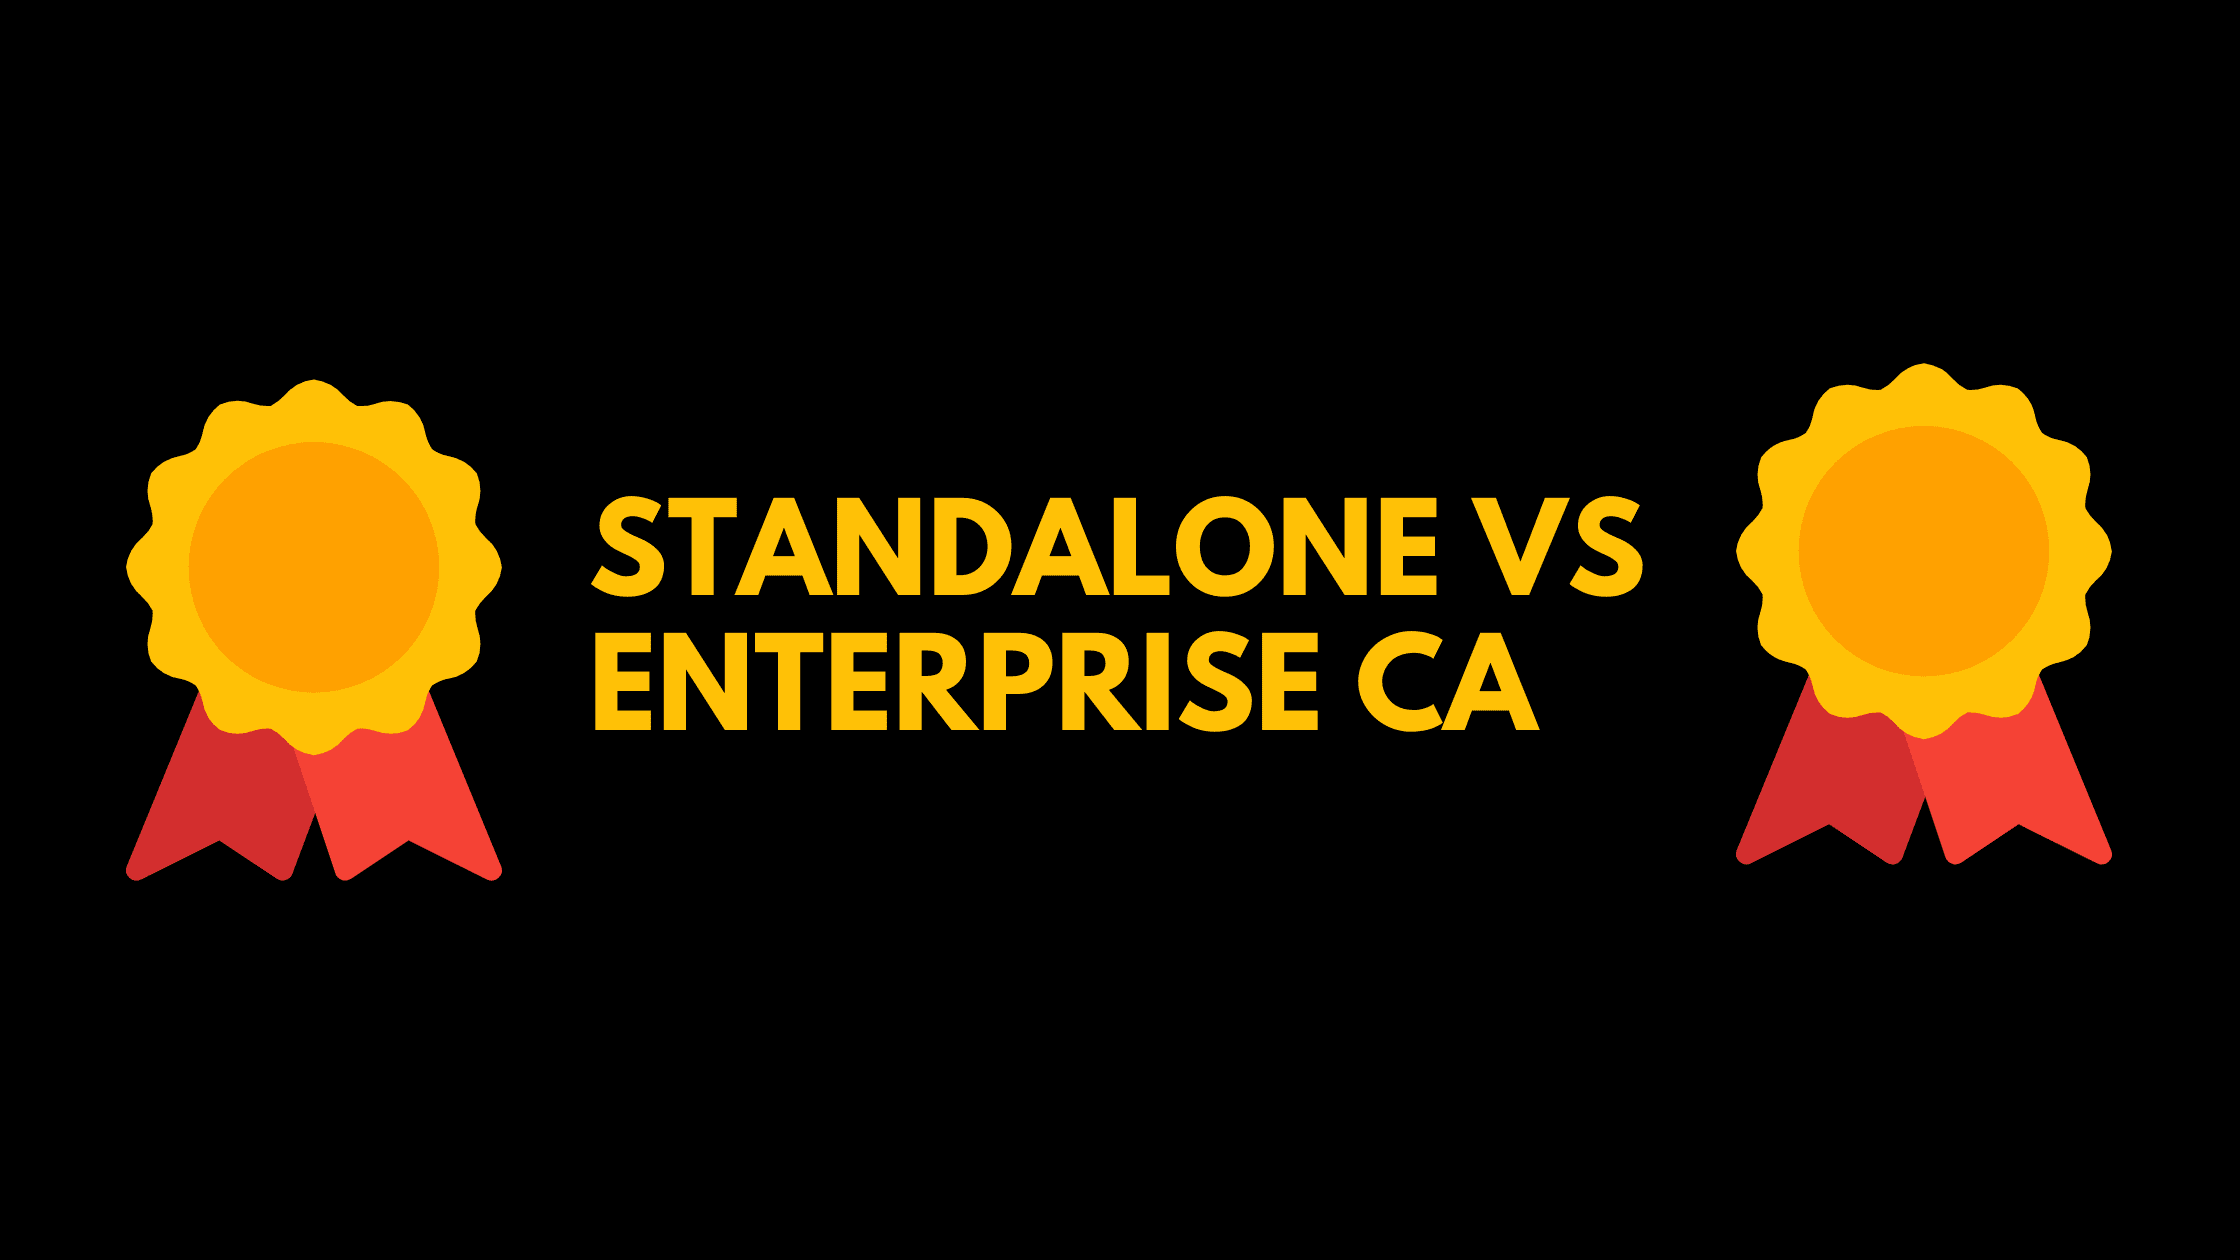 What Is The Difference Between A Standalone And An Enterprise Ca Standalone Vs Enterprise Ca